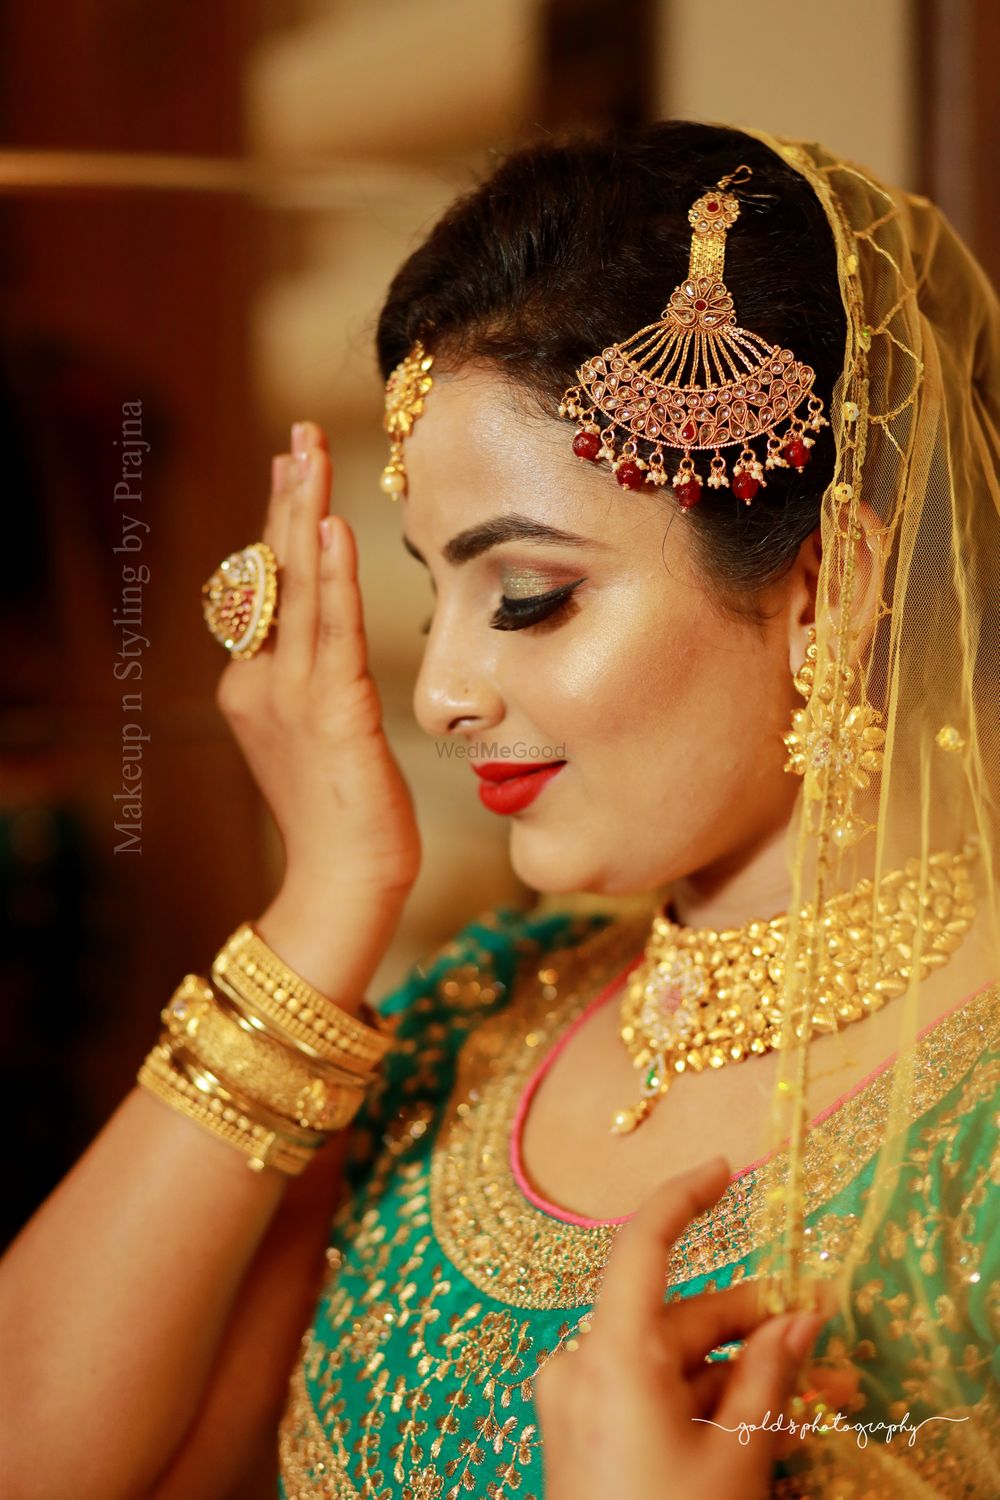 Photo From ashika model shoor - By Makeup and Styling by Prajna